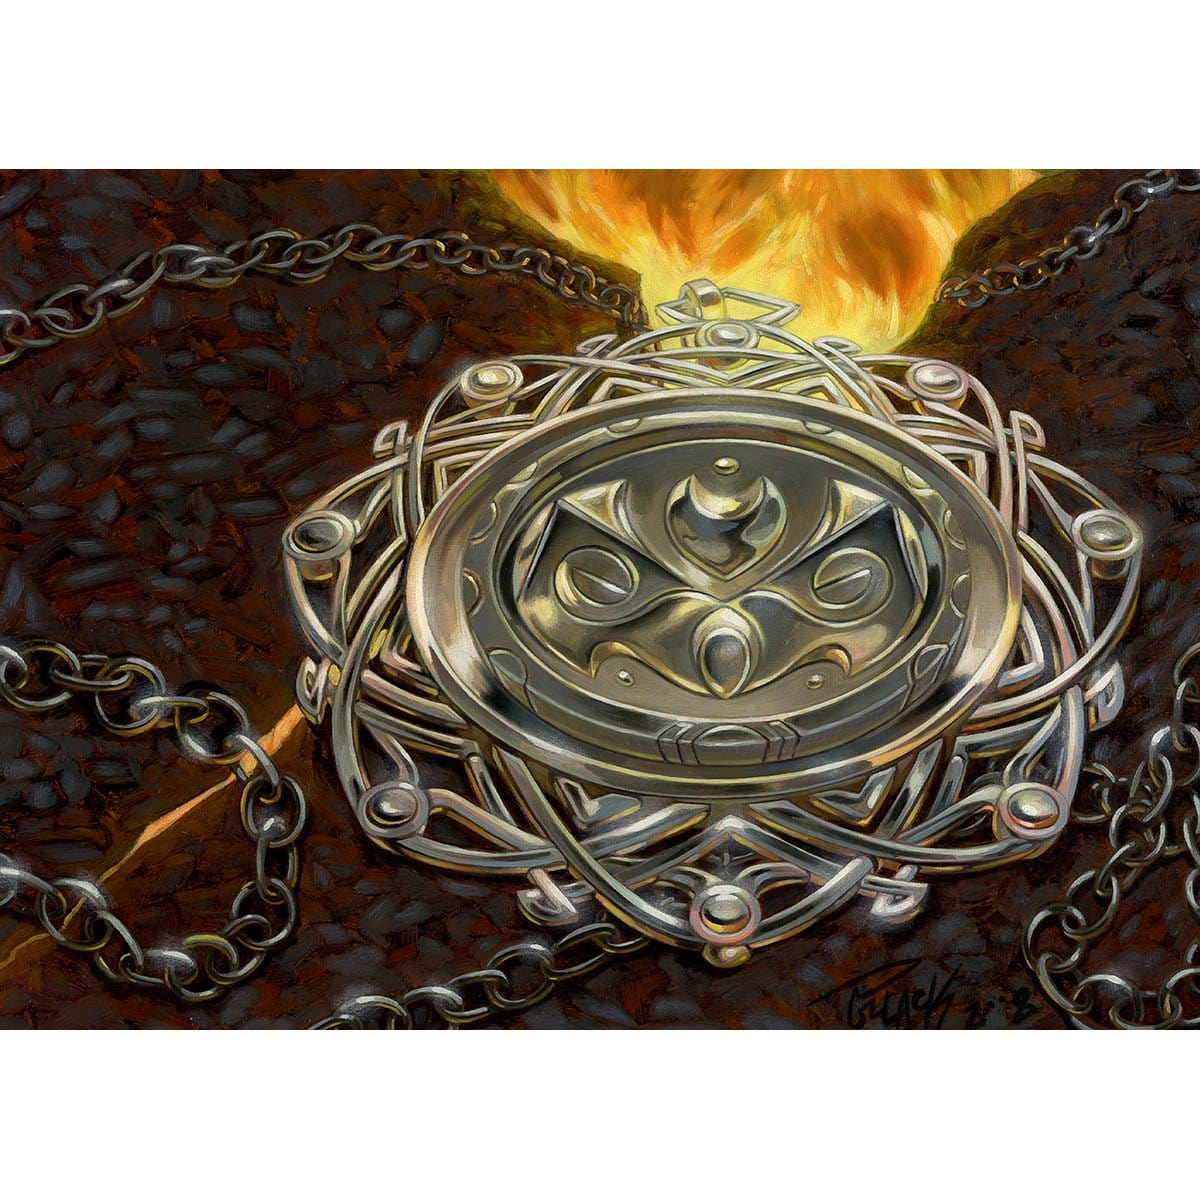 Chrome Mox Print - Print - Original Magic Art - Accessories for Magic the Gathering and other card games